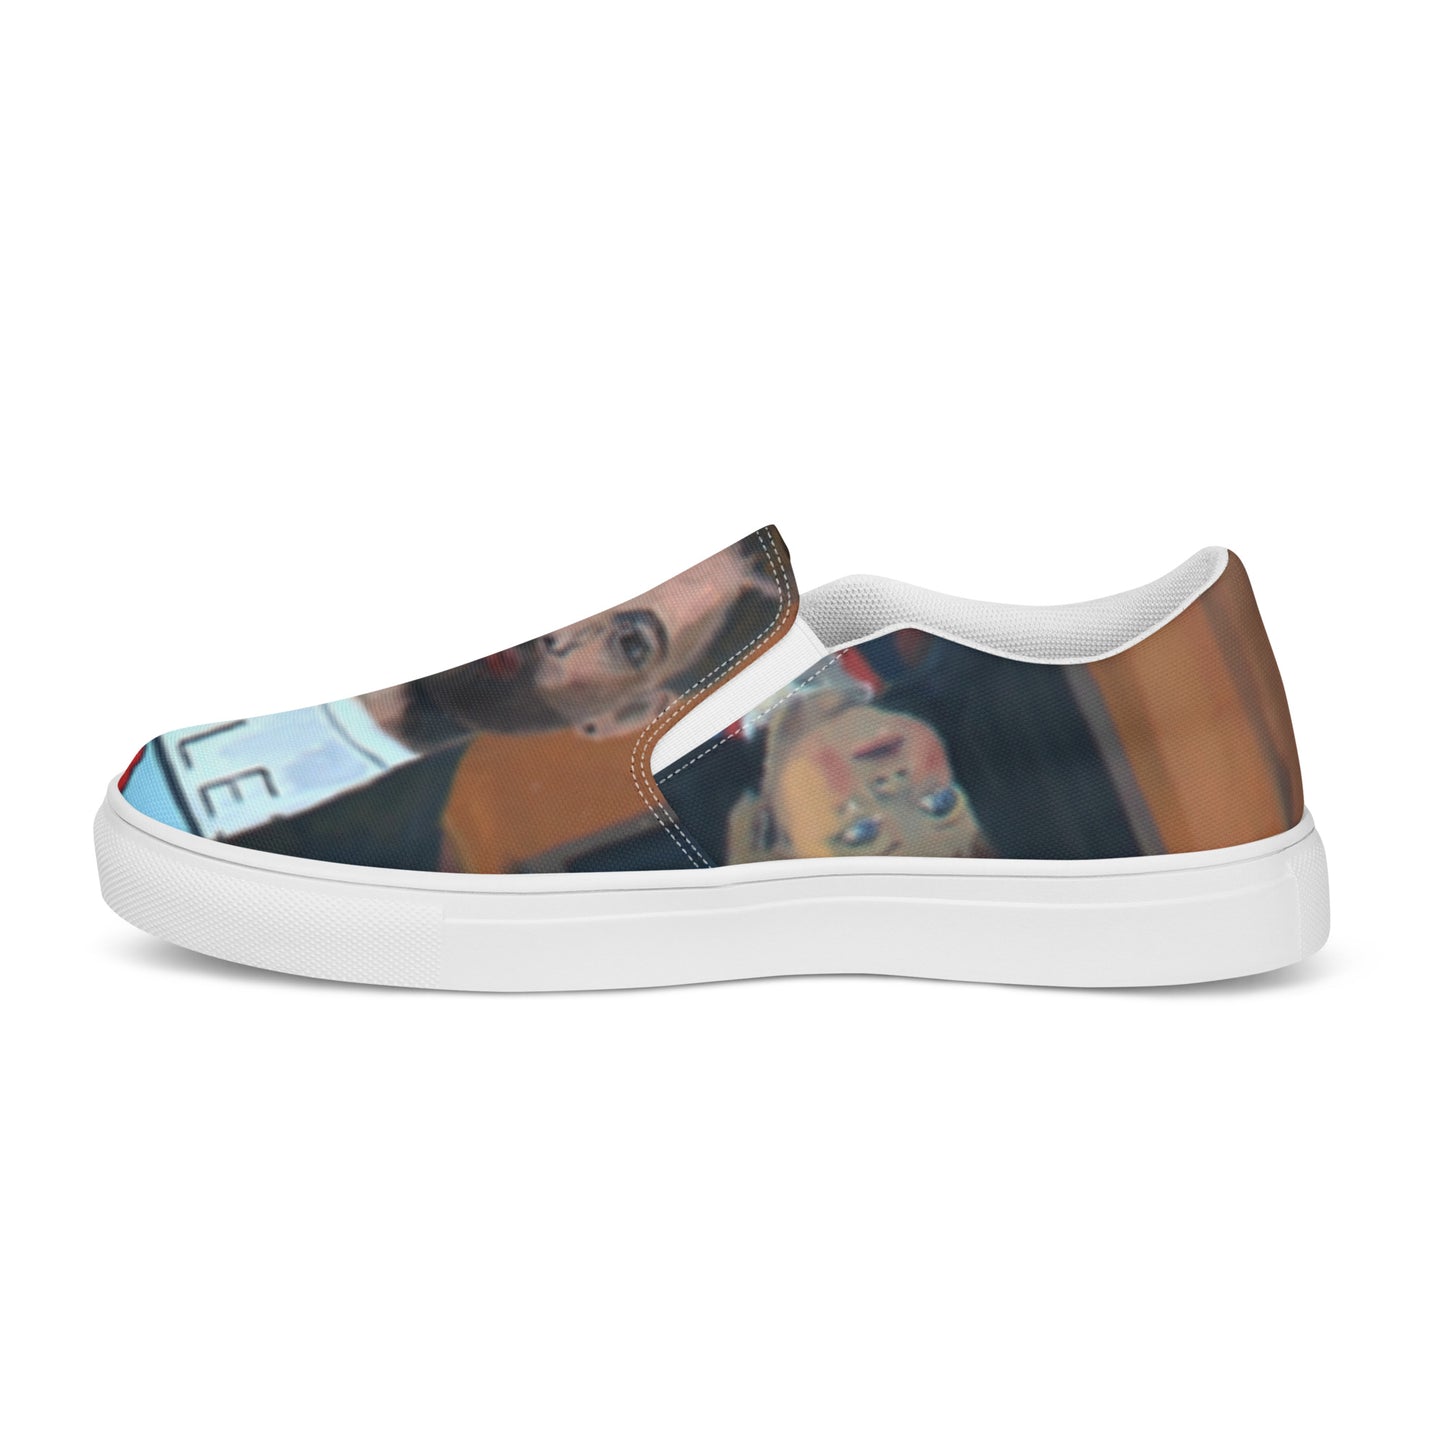 Man up - Women’s slip-on canvas shoes